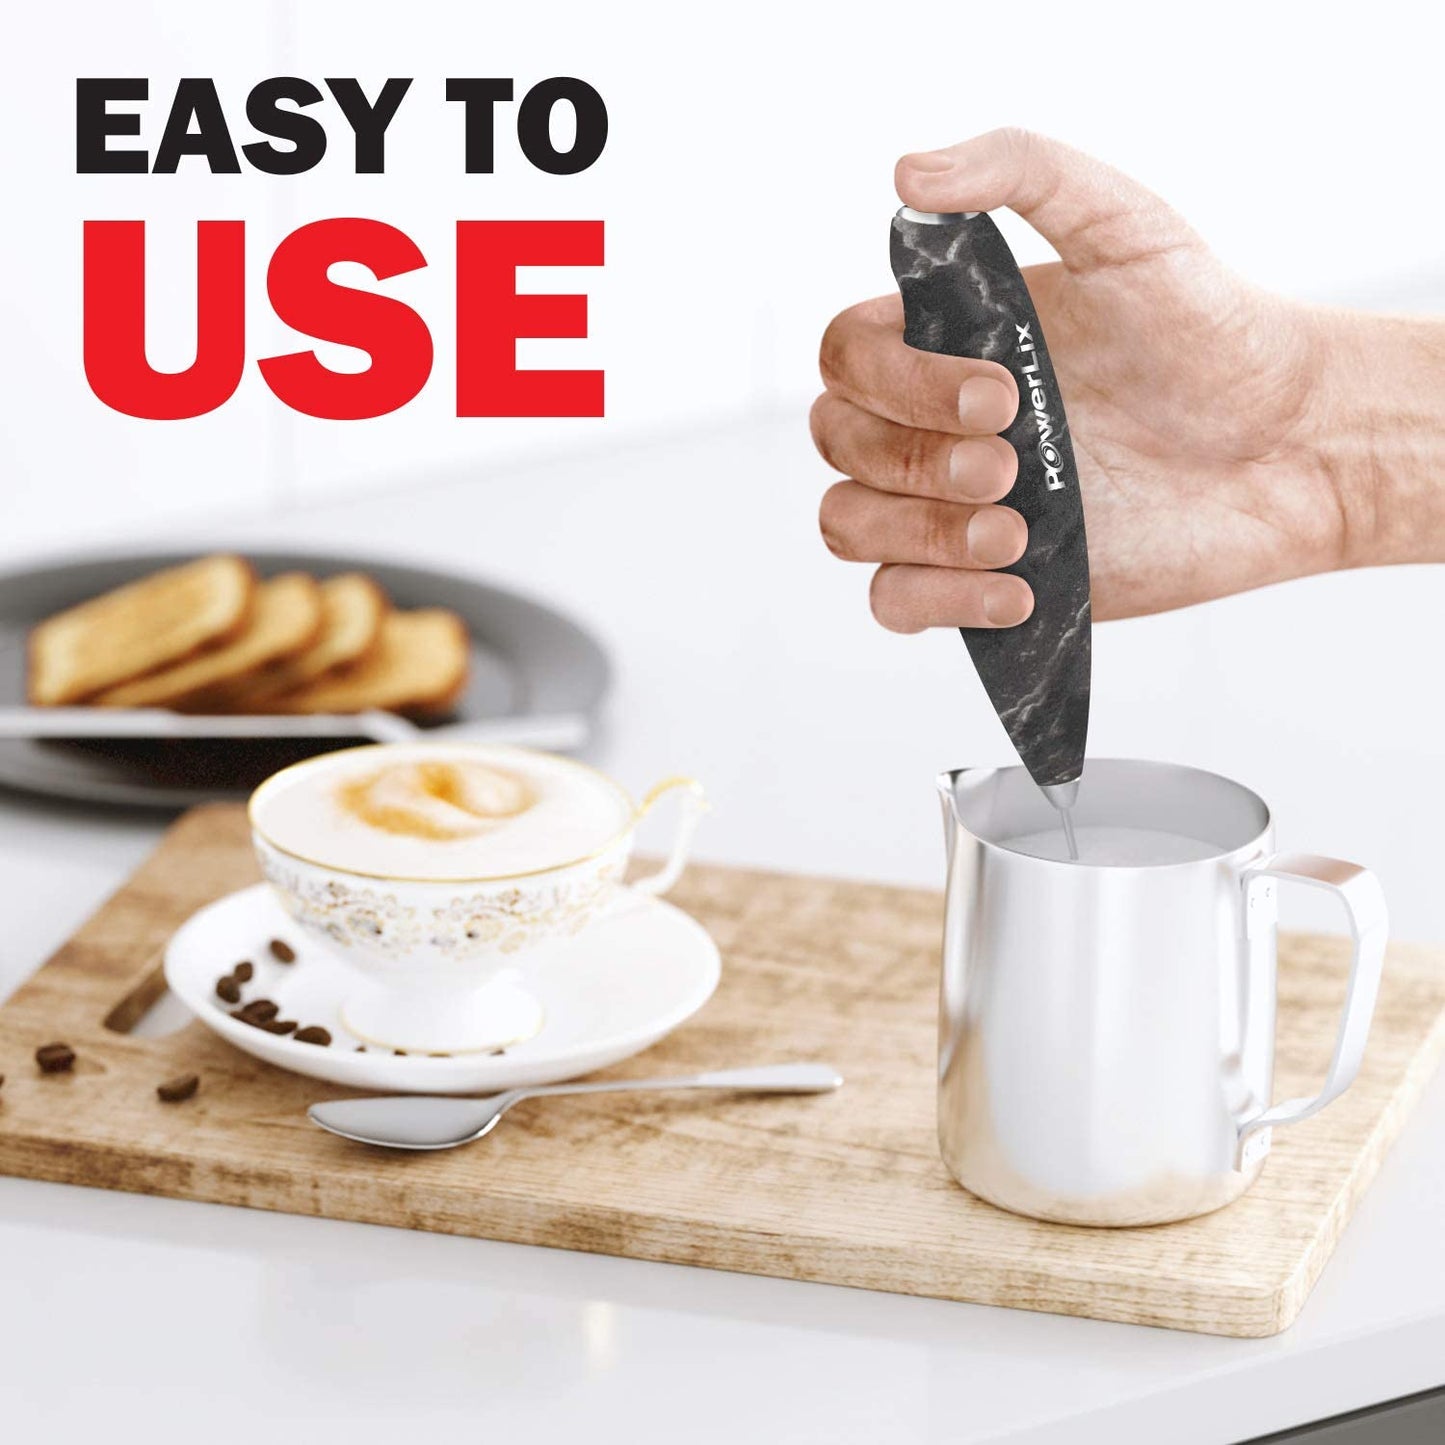 a person's hand holding a knife into a cup of liquid with text: 'EASY TO USE PowerLix'